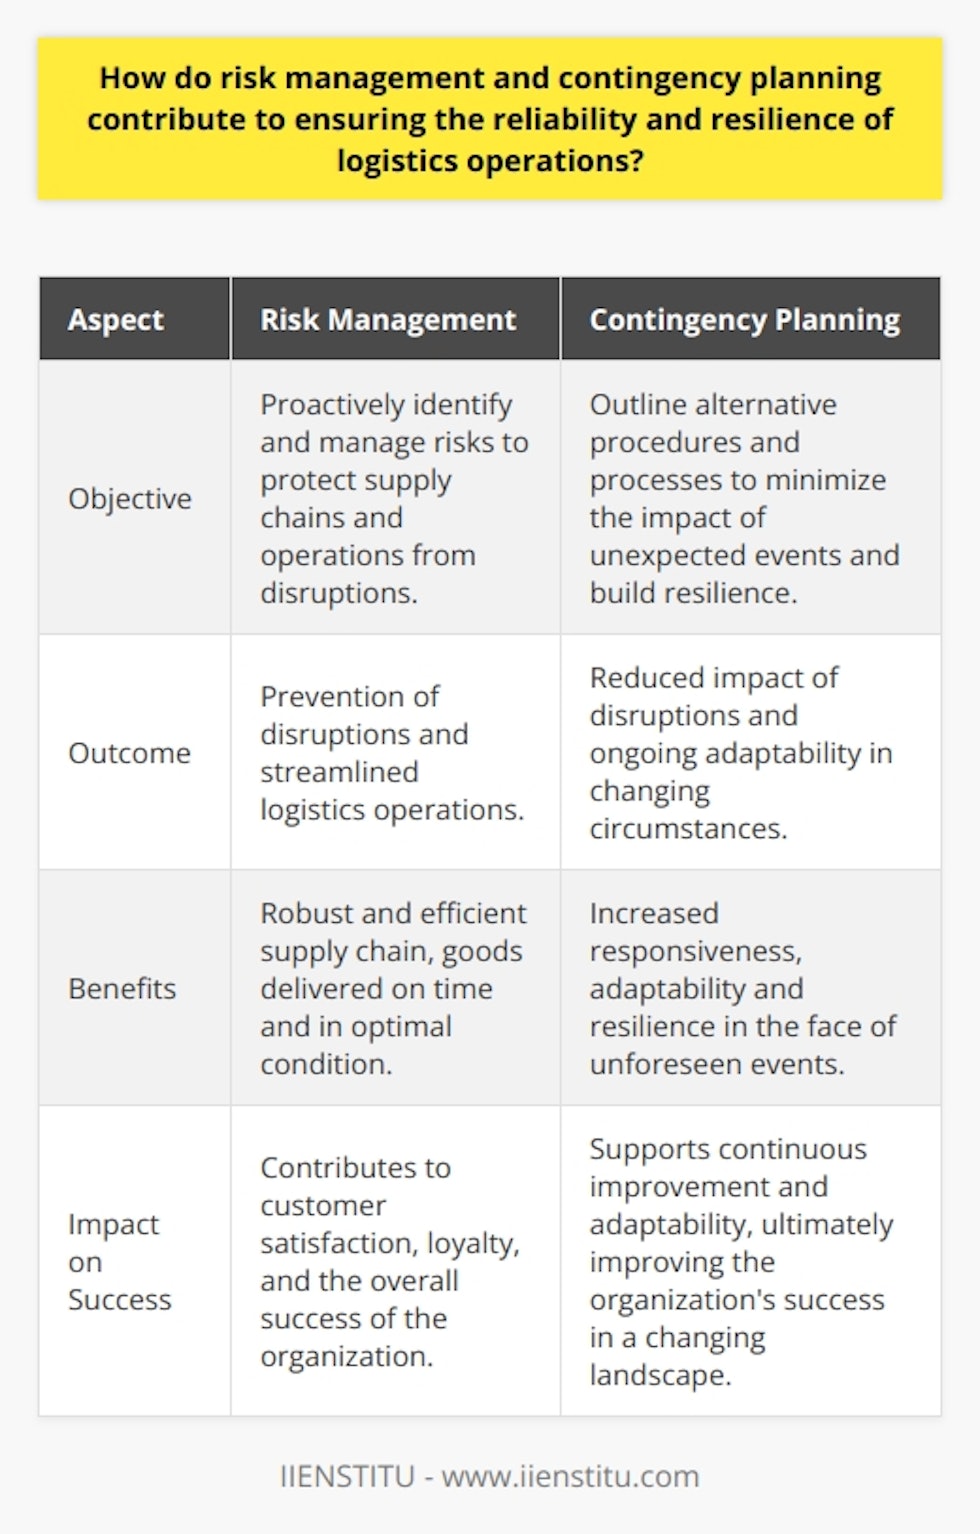 In conclusion, risk management and contingency planning are essential tools in ensuring the reliability and resilience of logistics operations. By proactively identifying and managing risks, businesses can protect their supply chains and operations from disruptions. Furthermore, through effective contingency planning, companies can build resilience by outlining alternative procedures and processes to minimize the impact of unexpected events.Together, the fields of risk management and contingency planning serve to create a more robust and efficient logistics operation, ensuring that goods reach their intended destinations on time, in optimal condition, and with minimal disruption. This approach ultimately contributes to improved customer satisfaction, loyalty, and the overall success of the organization. By investing in these tools and strategies, logistics operations can continue to thrive and adapt to an ever-changing global landscape.